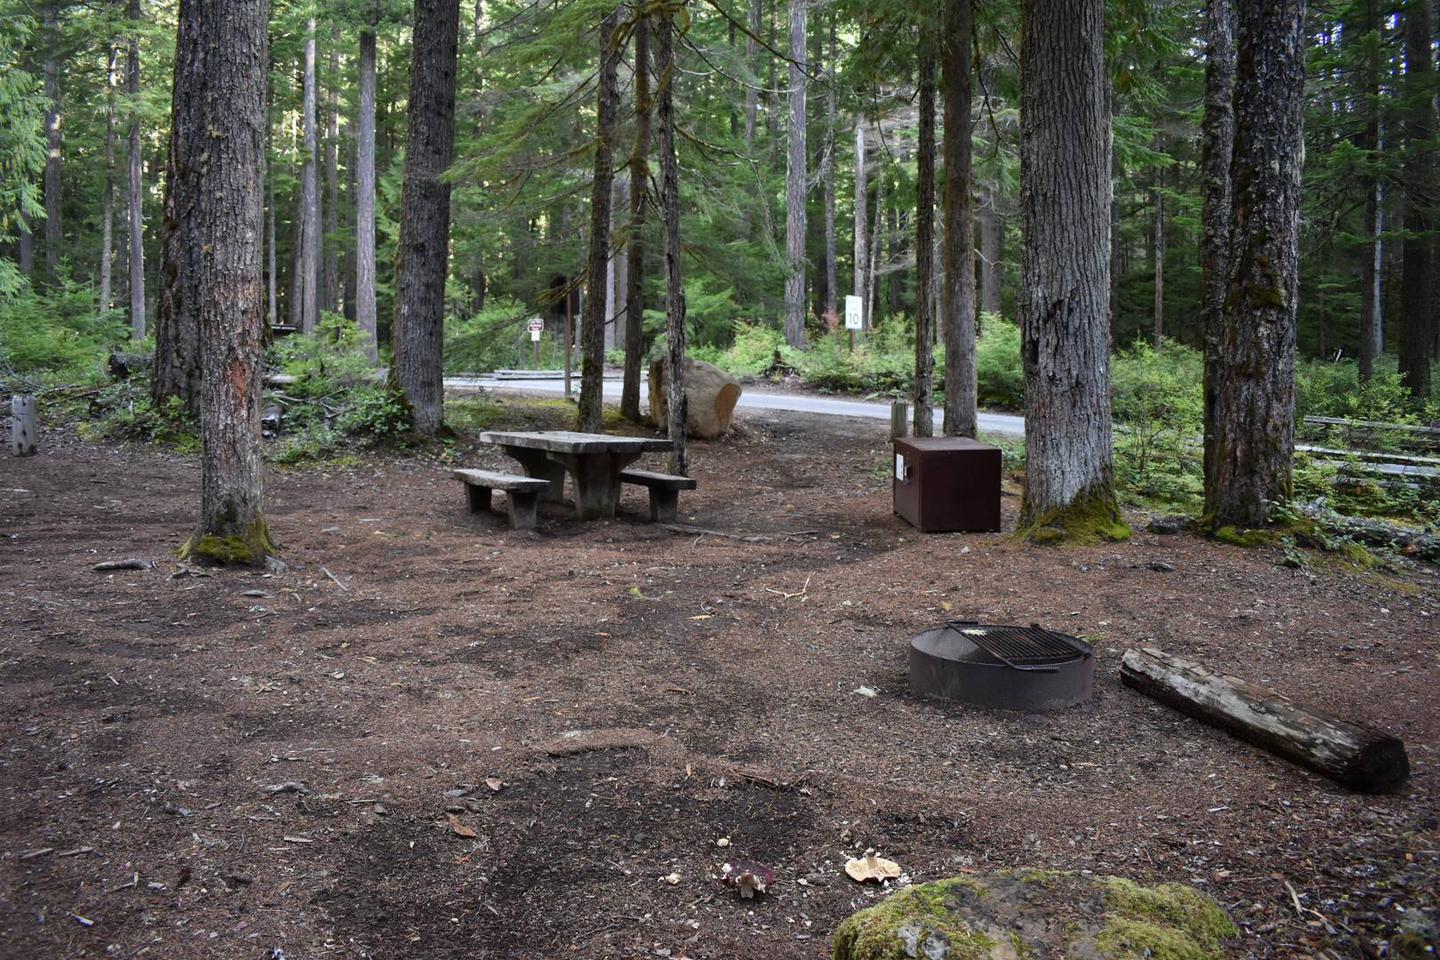 Campers are provided with a picnic table, fire pit, and food storage box.